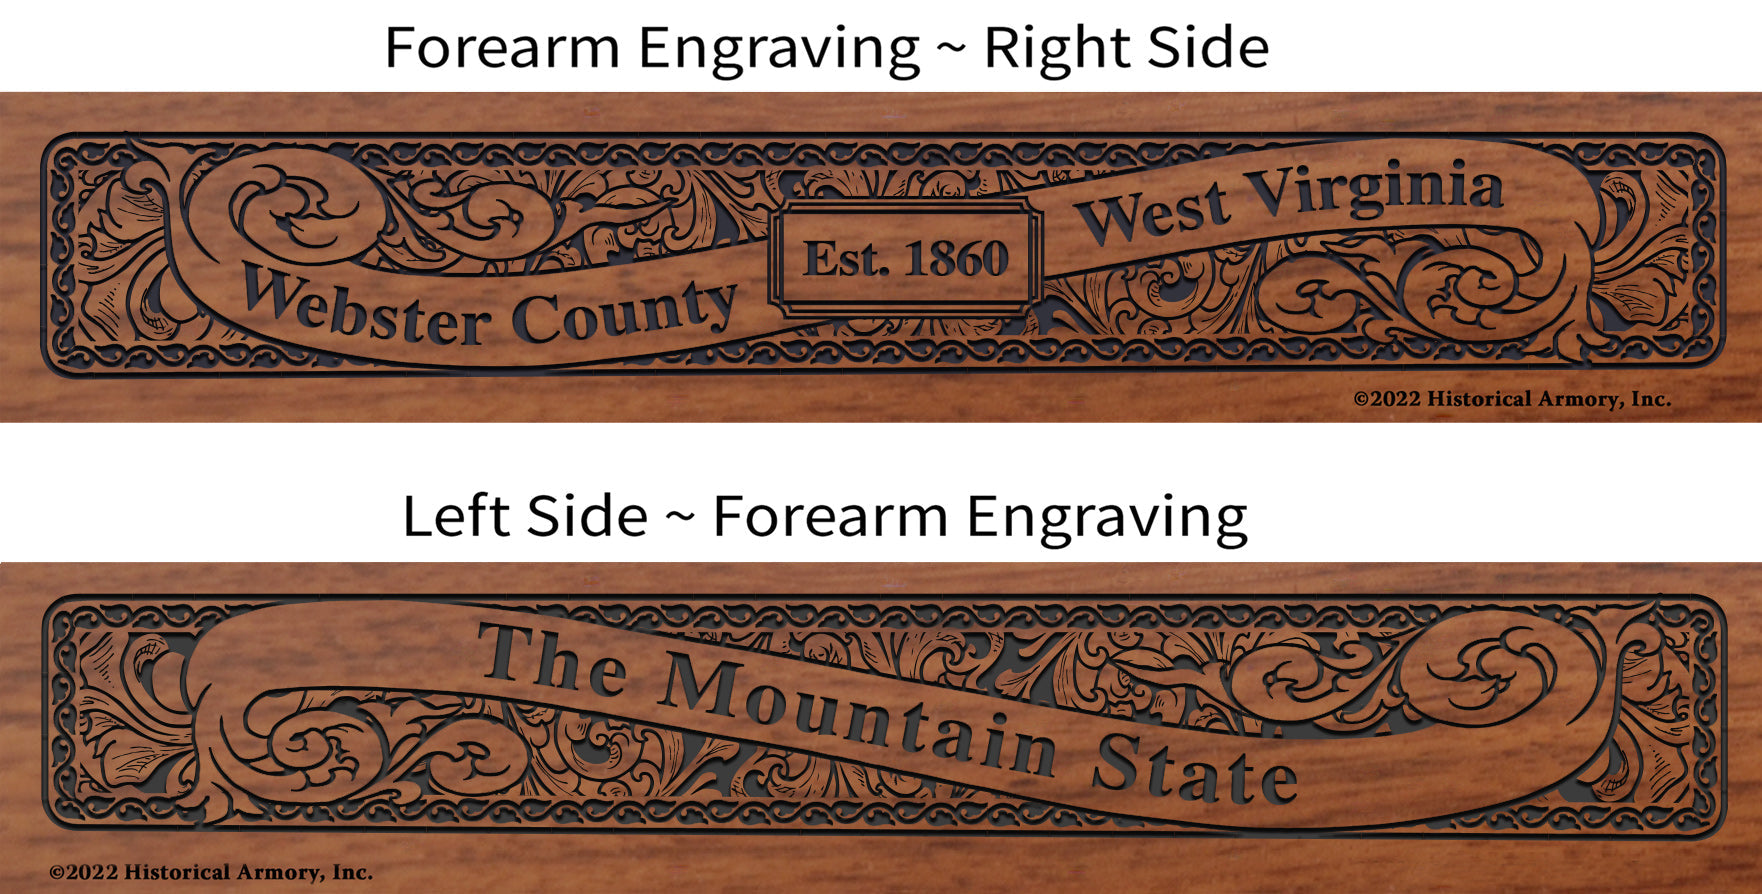 Webster County West Virginia Engraved Rifle Forearm